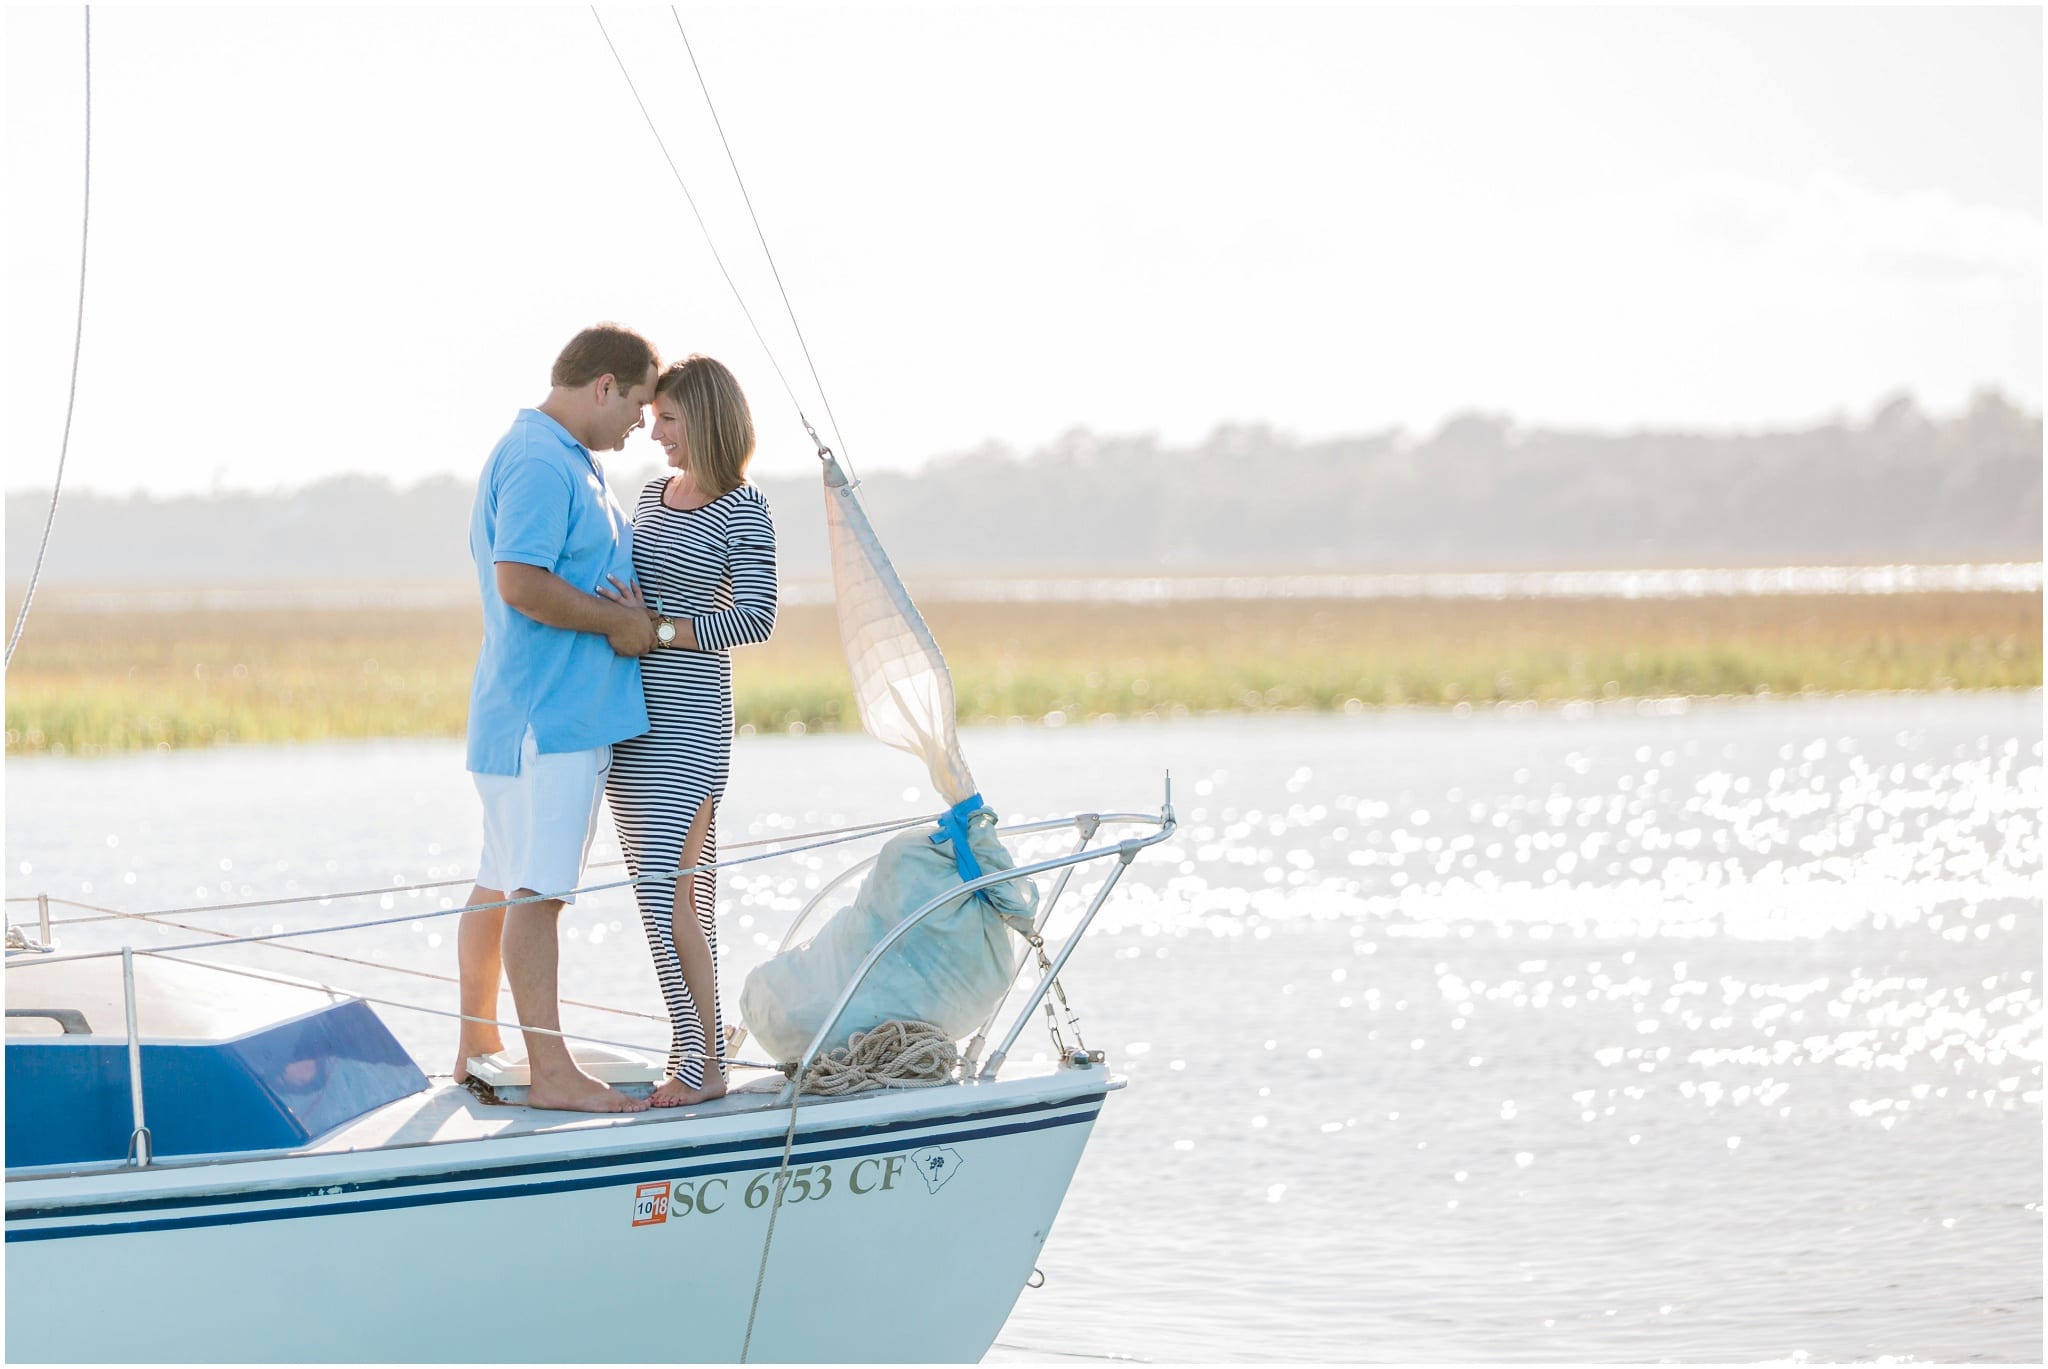 Engagement session on a sail boat, Dana and Bradley embracing on the bow, Sailing, Myrtle Beach Engagement Photography Session 8, Murrells Inlet, South Carolina, www.onelifephoto.net Photography